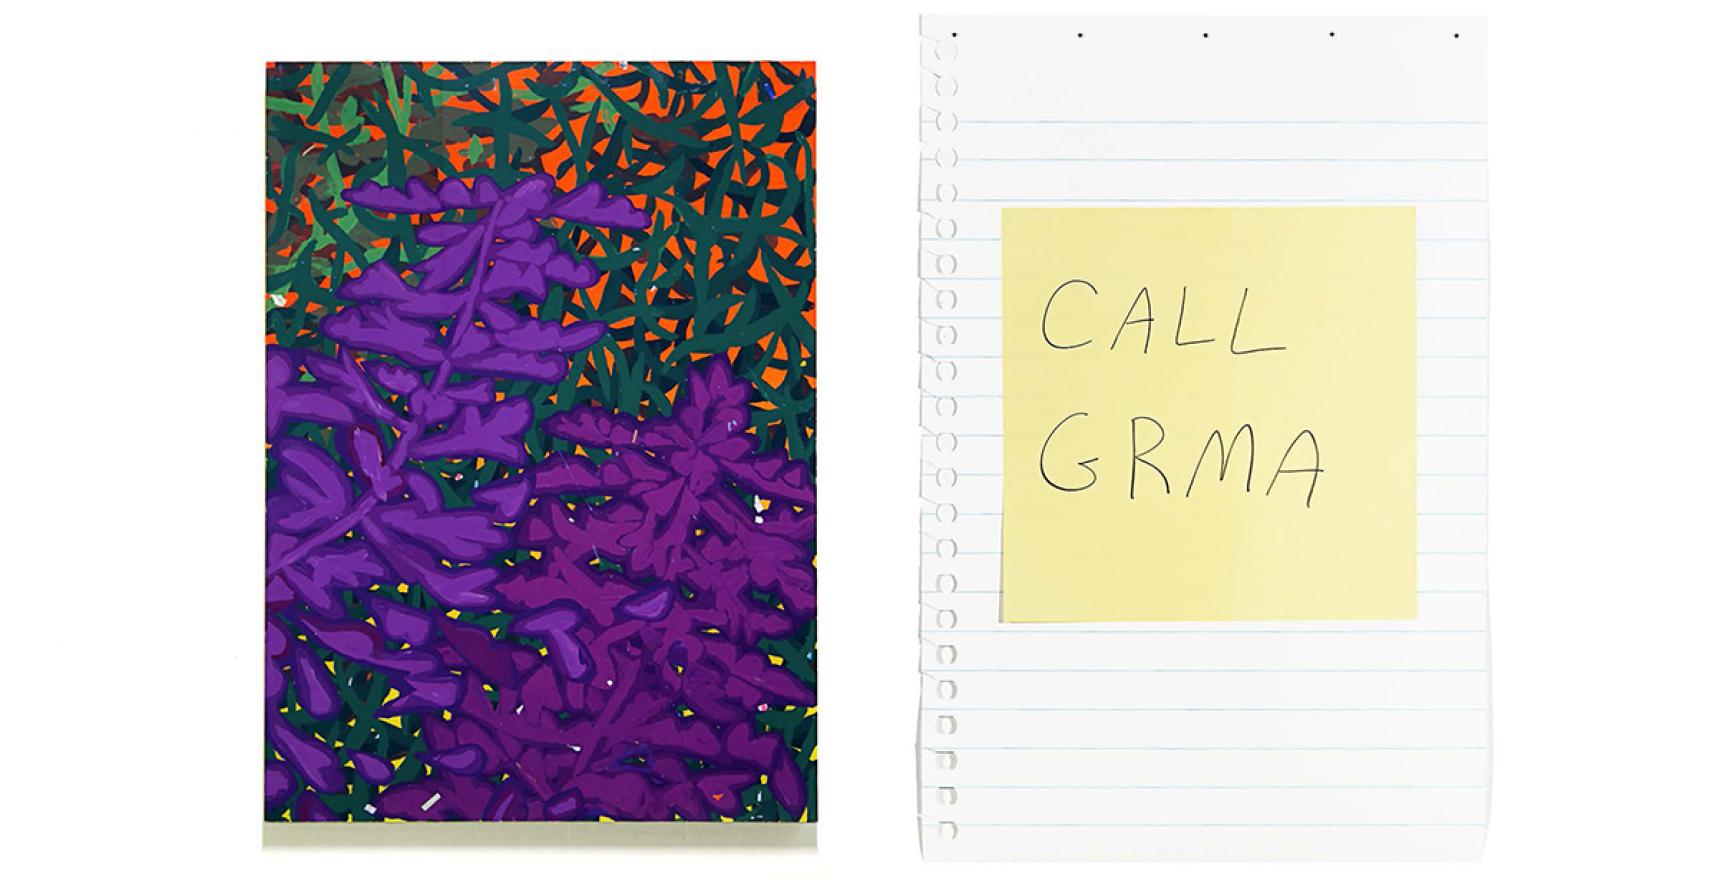 painting purple floral opposite call GRMA post-it note